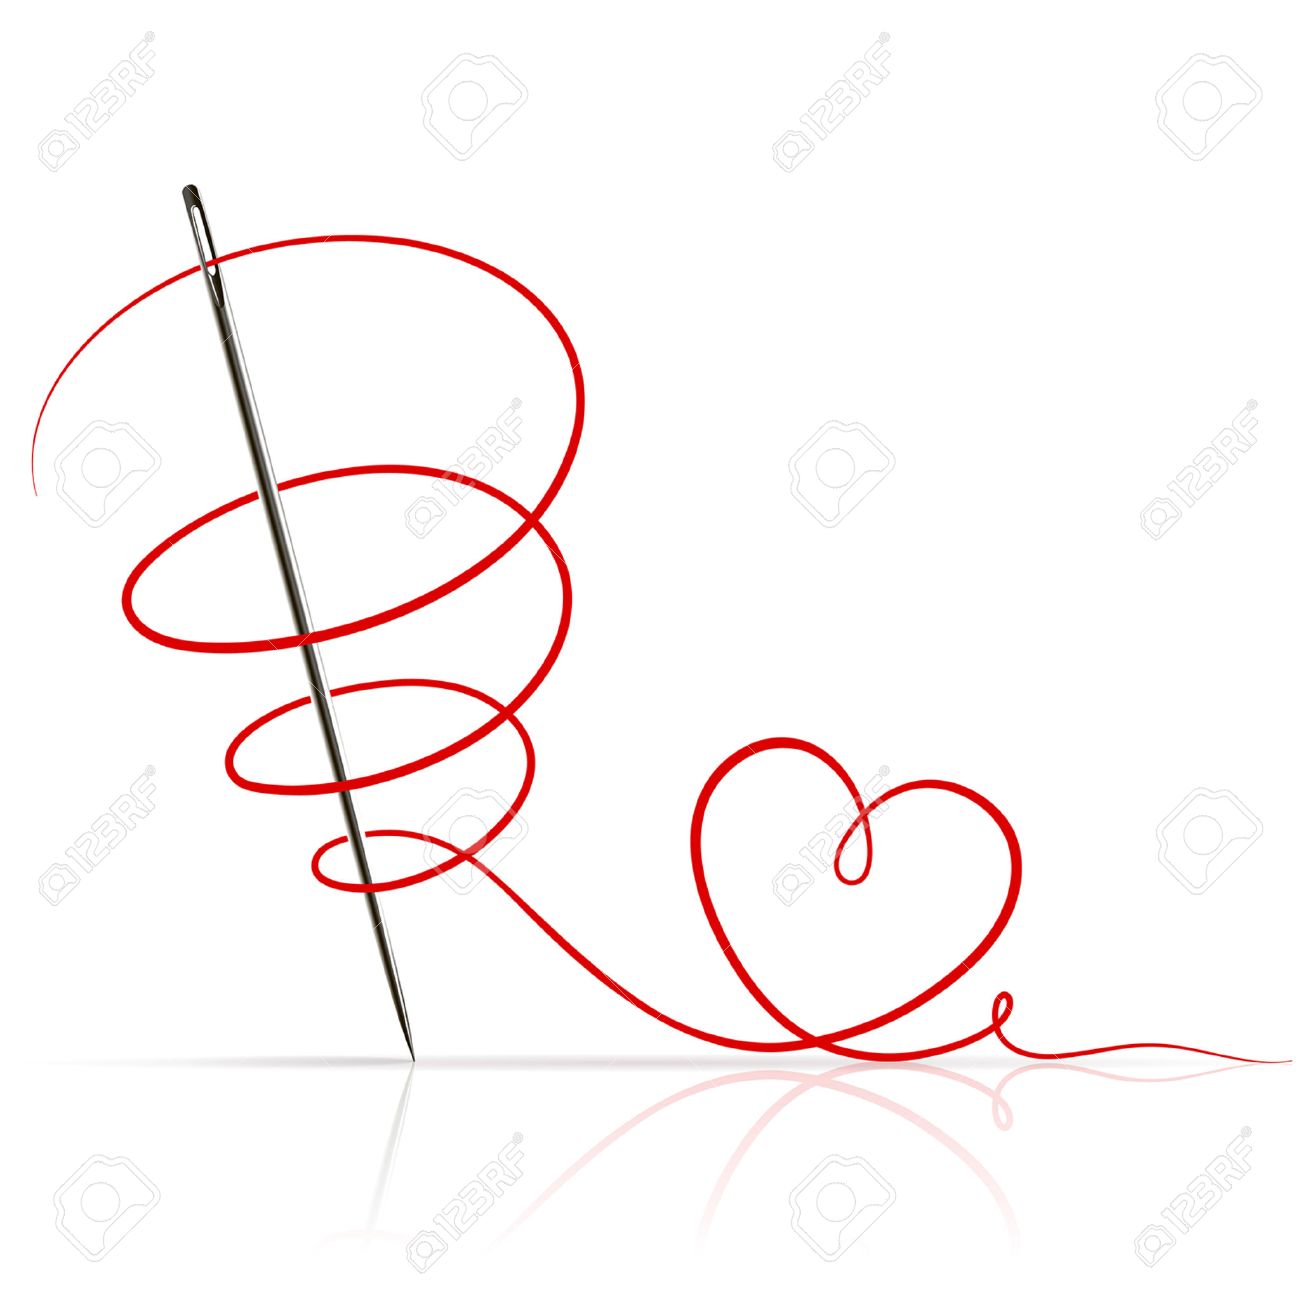 Sewing Needle With Red Thread On White Background Royalty